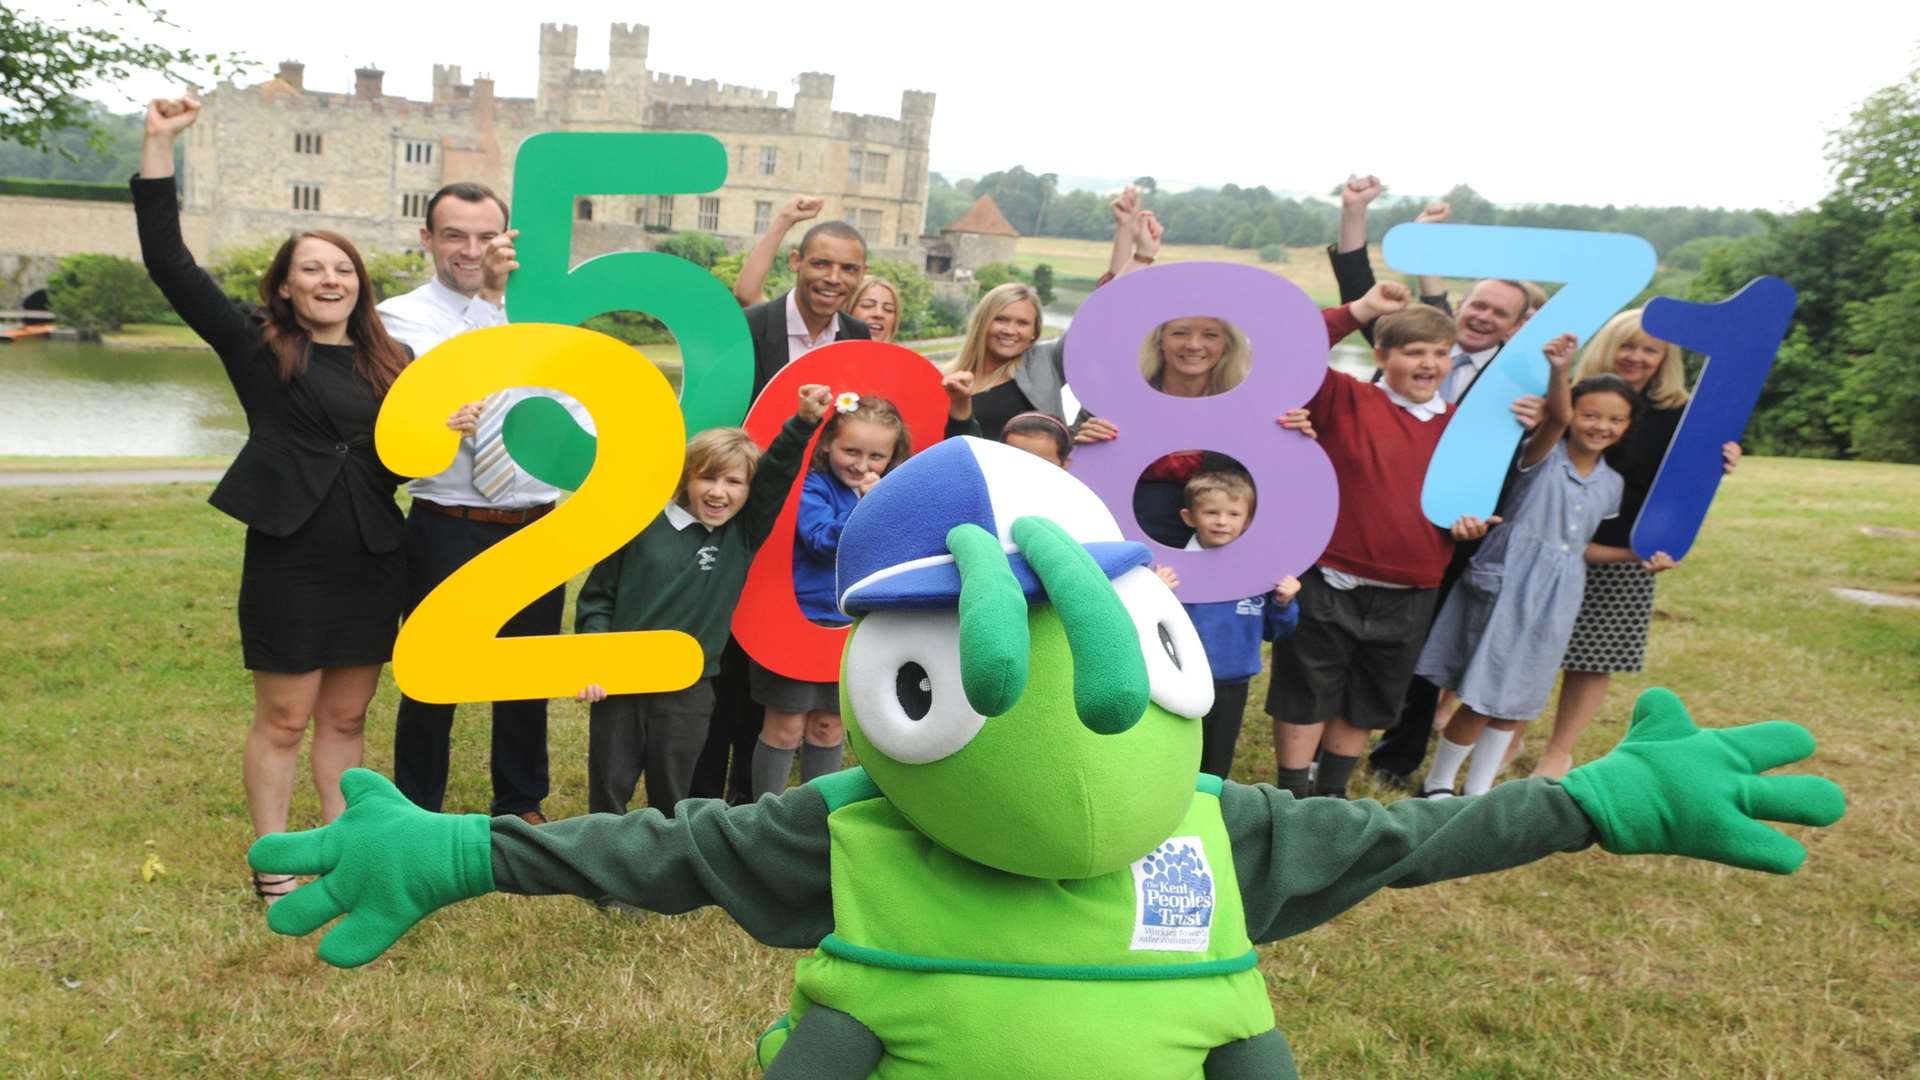 A record 250,871 car journeys have been removed from Kent and Medway's roads thanks to the KM Walk to School campaign.